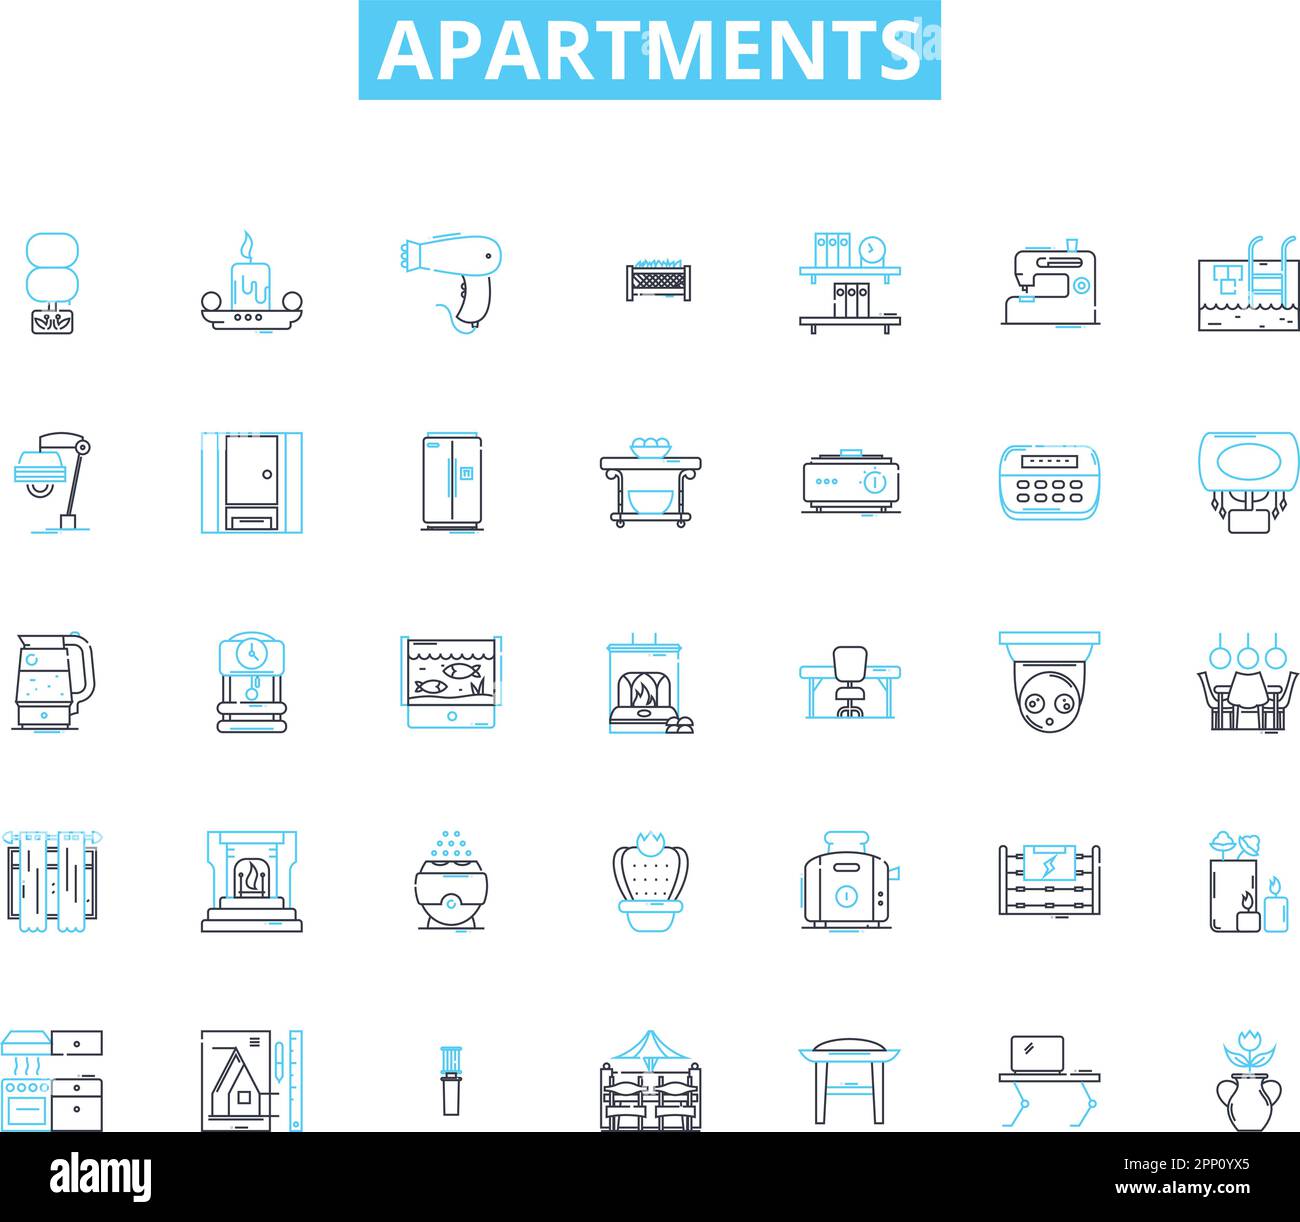 Apartments linear icons set. Homey, Cozy, Spacious, Luxurious, Stylish, Modern, Affordable line vector and concept signs. Gated,High-rise,Furnished Stock Vector